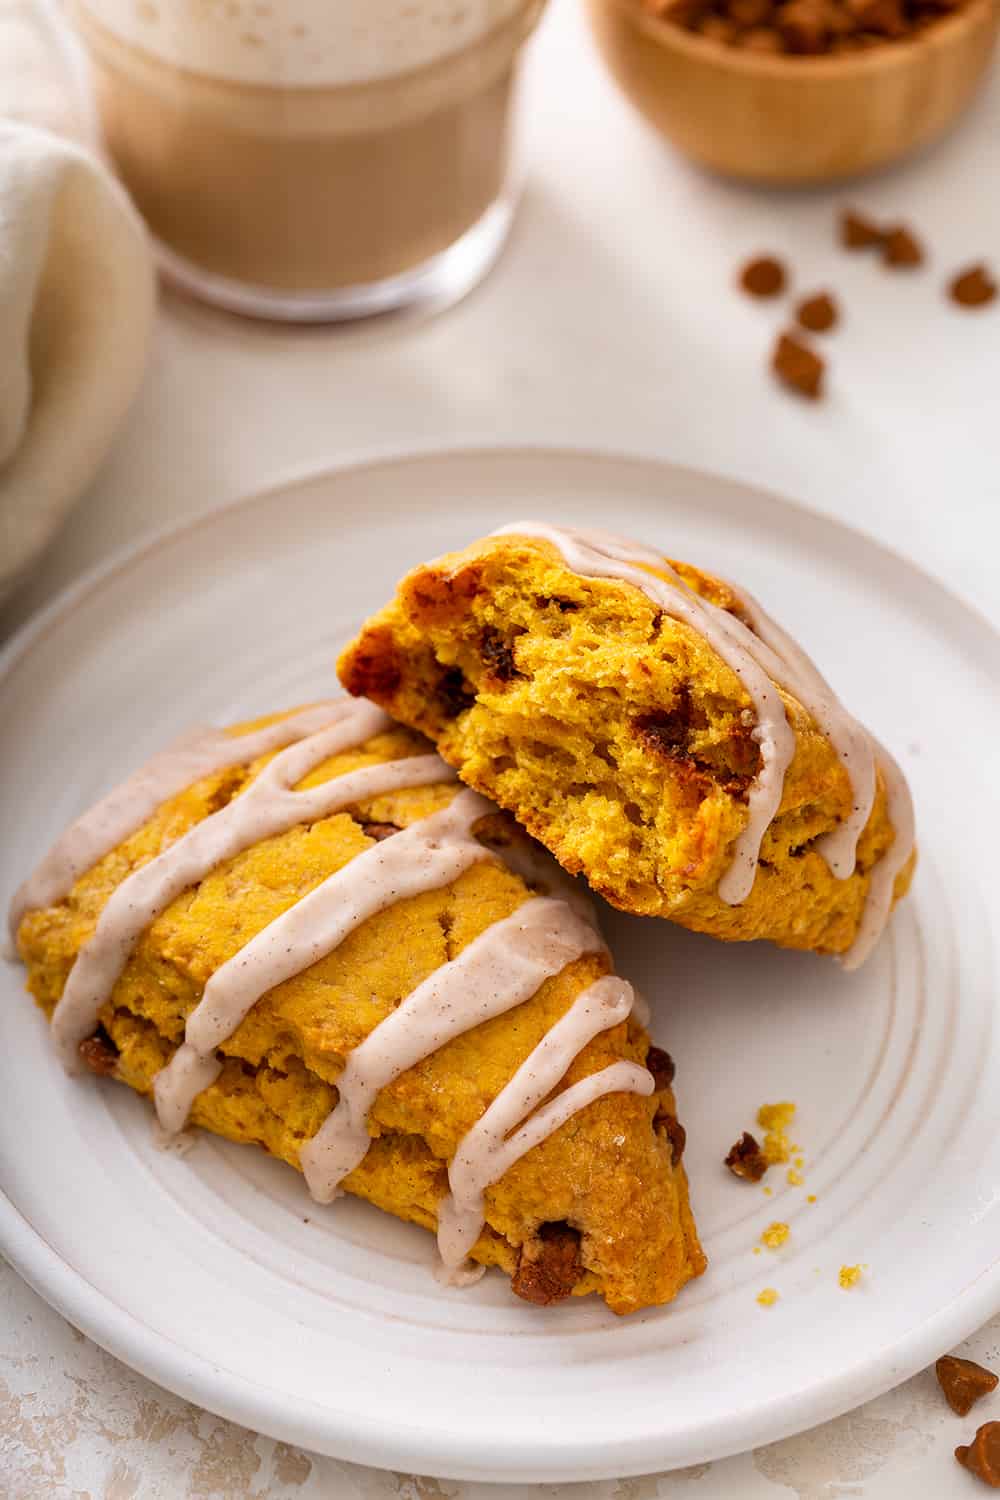 Two pumpkin scones on a white plate. One of them has been broken in half to show the inside of the scone